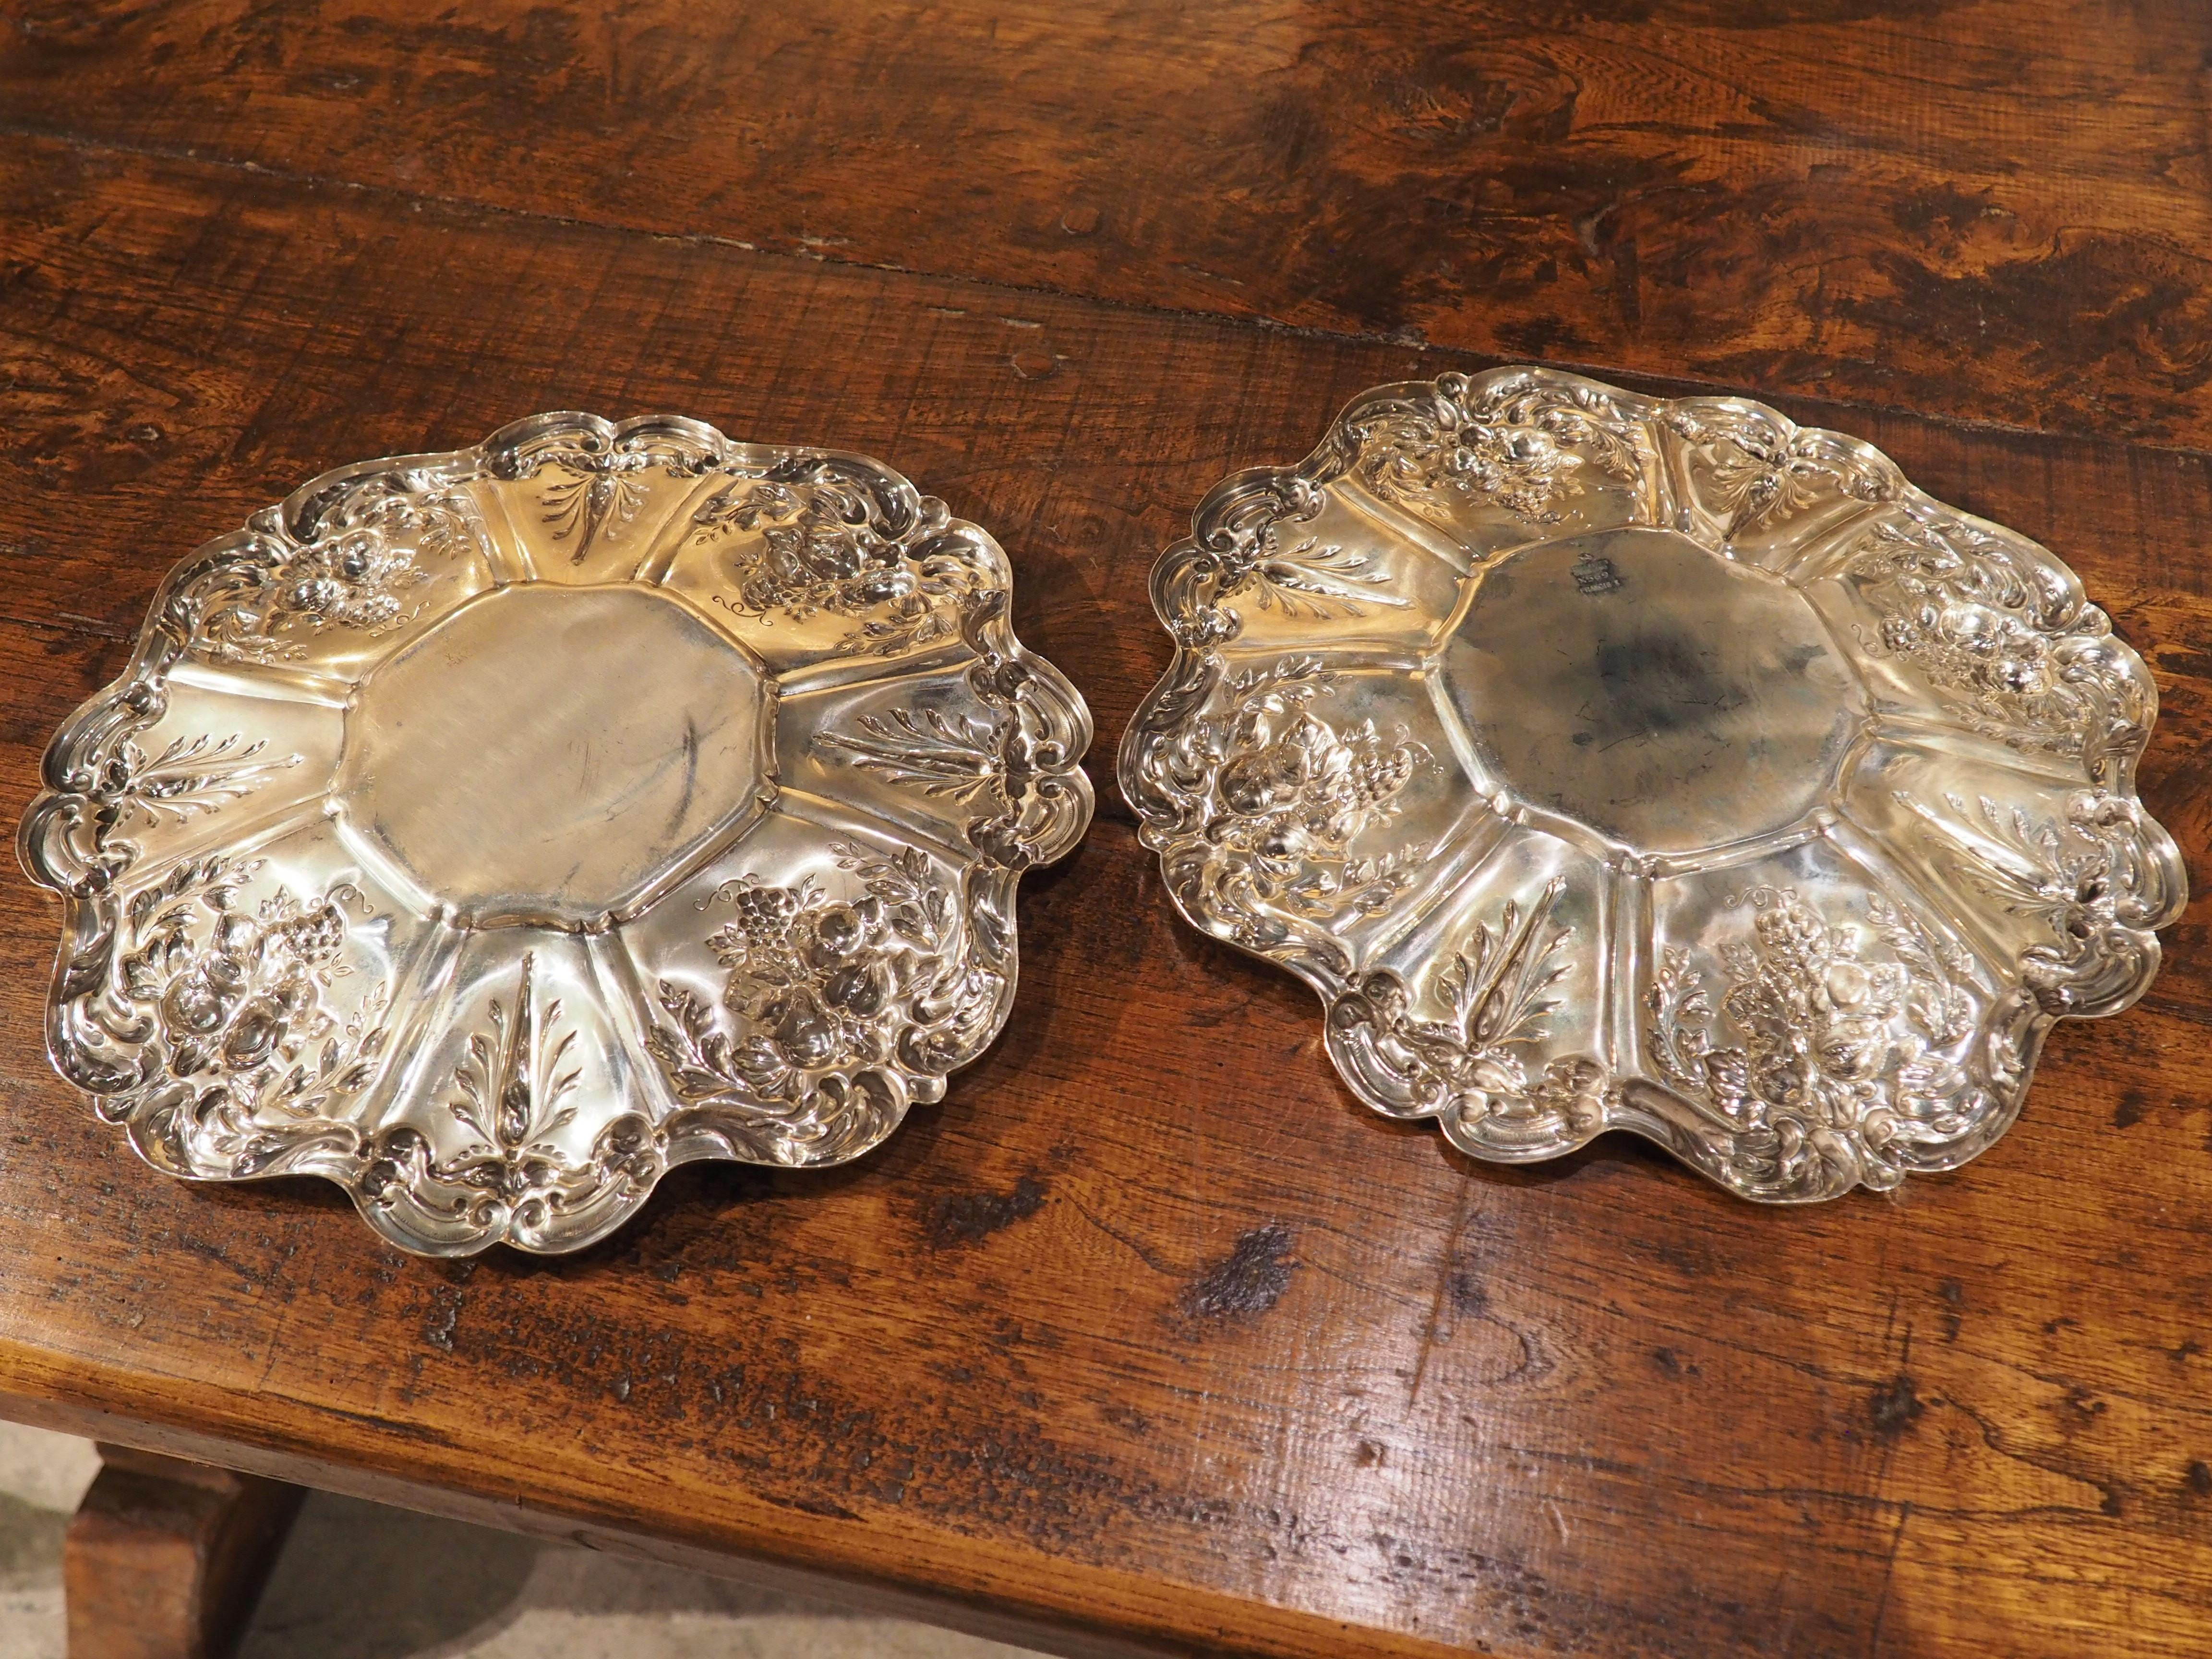 First produced in 1907 by the American silversmith company, Reed & Barton, this pair of sterling silver platters has repousse fruit motifs. Repousse is a metalwork technique where the verso (back) side is hammered to produce low relief images that